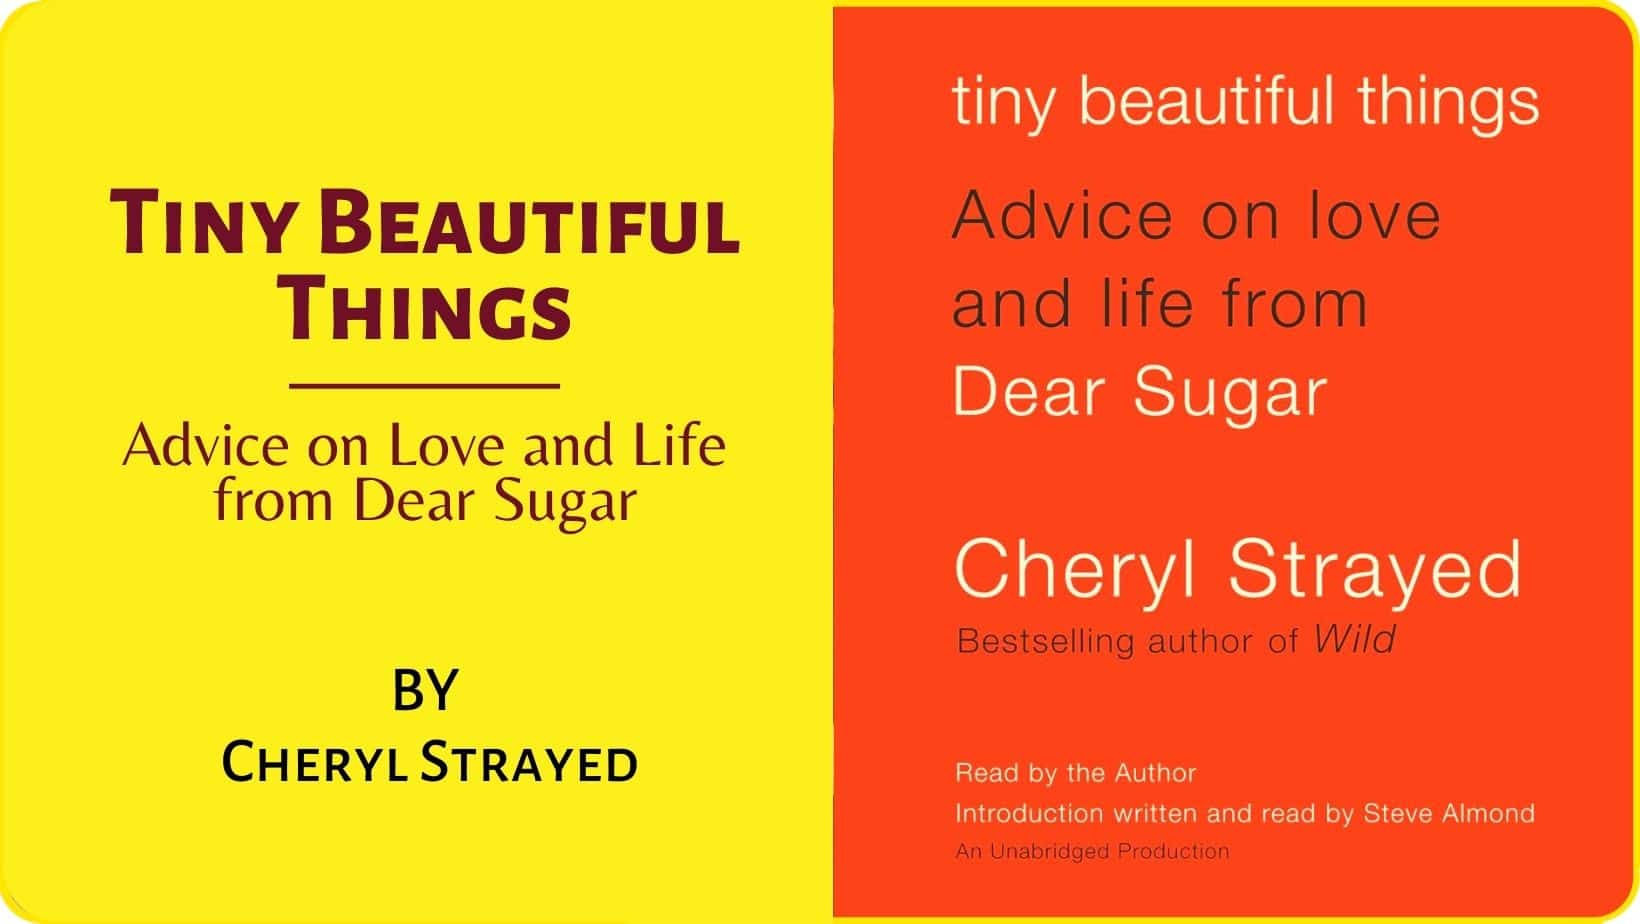 broken relationship books to read Tiny Beautiful Things by Cheryl Strayed